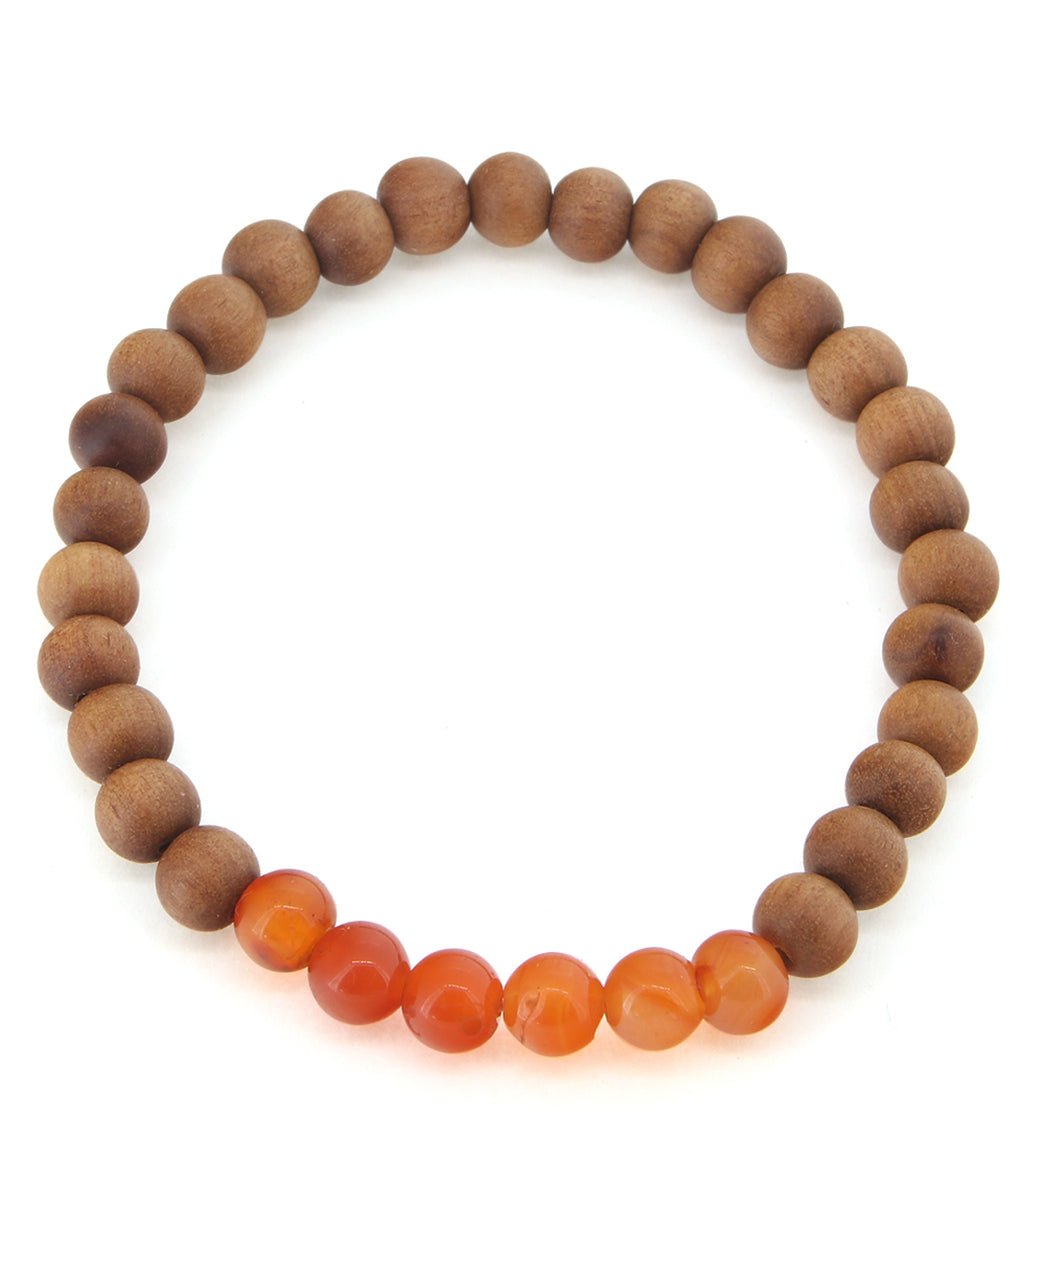 Red Carnelian Bracelet Natural Crystal Bracelet 12MM Beads Size AAA Quality  24 Beads at Rs 350/piece | Gemstone Bracelet in Anand | ID: 27101085548